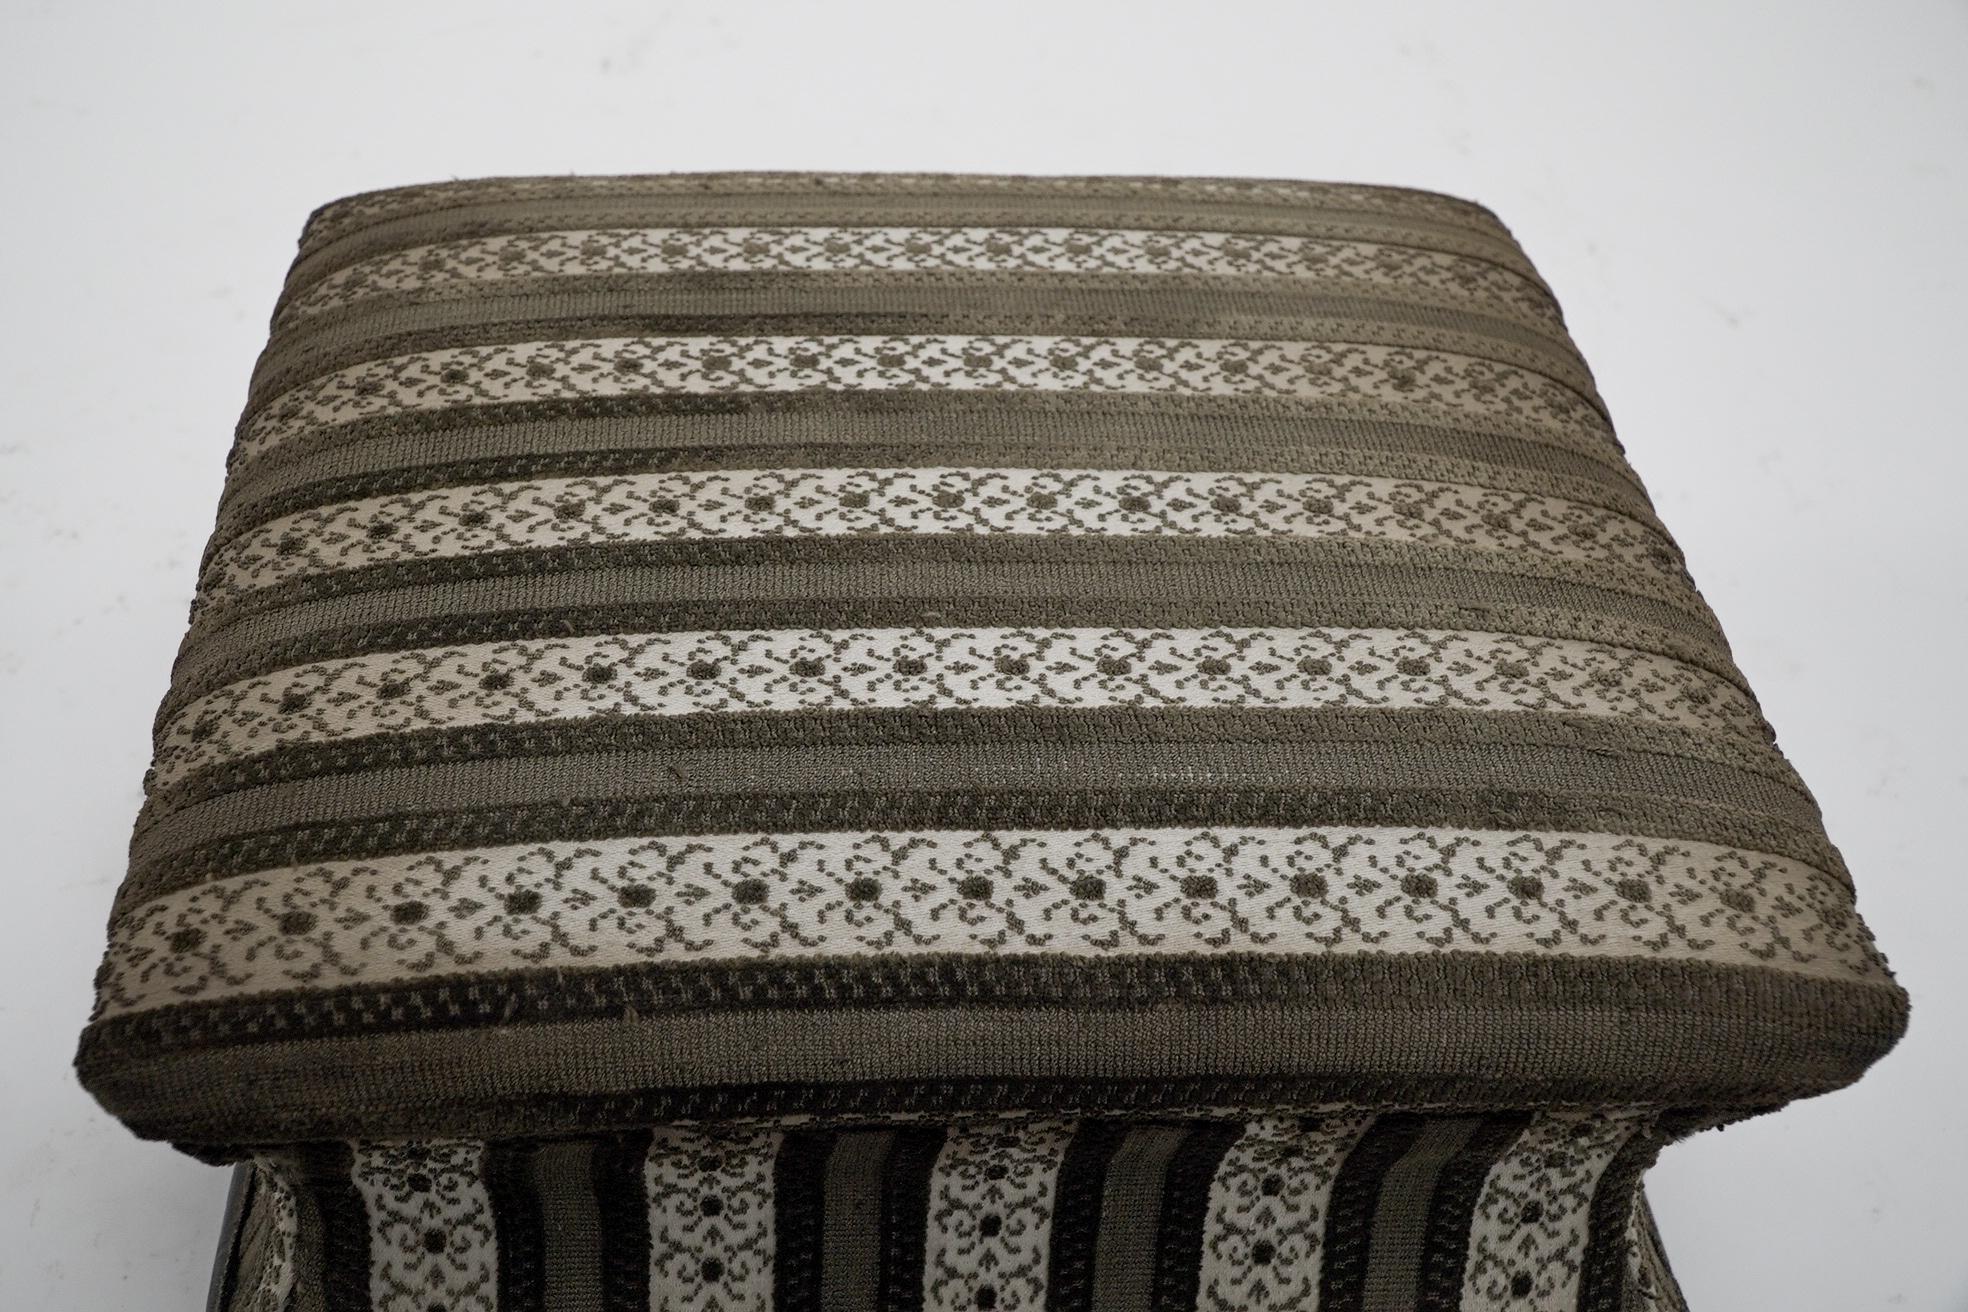 An Aesthetic Movement ebonized footstool with concave-shaped sides and incised parcel gilt decoration on little flat feet with striped braided upholstery.
